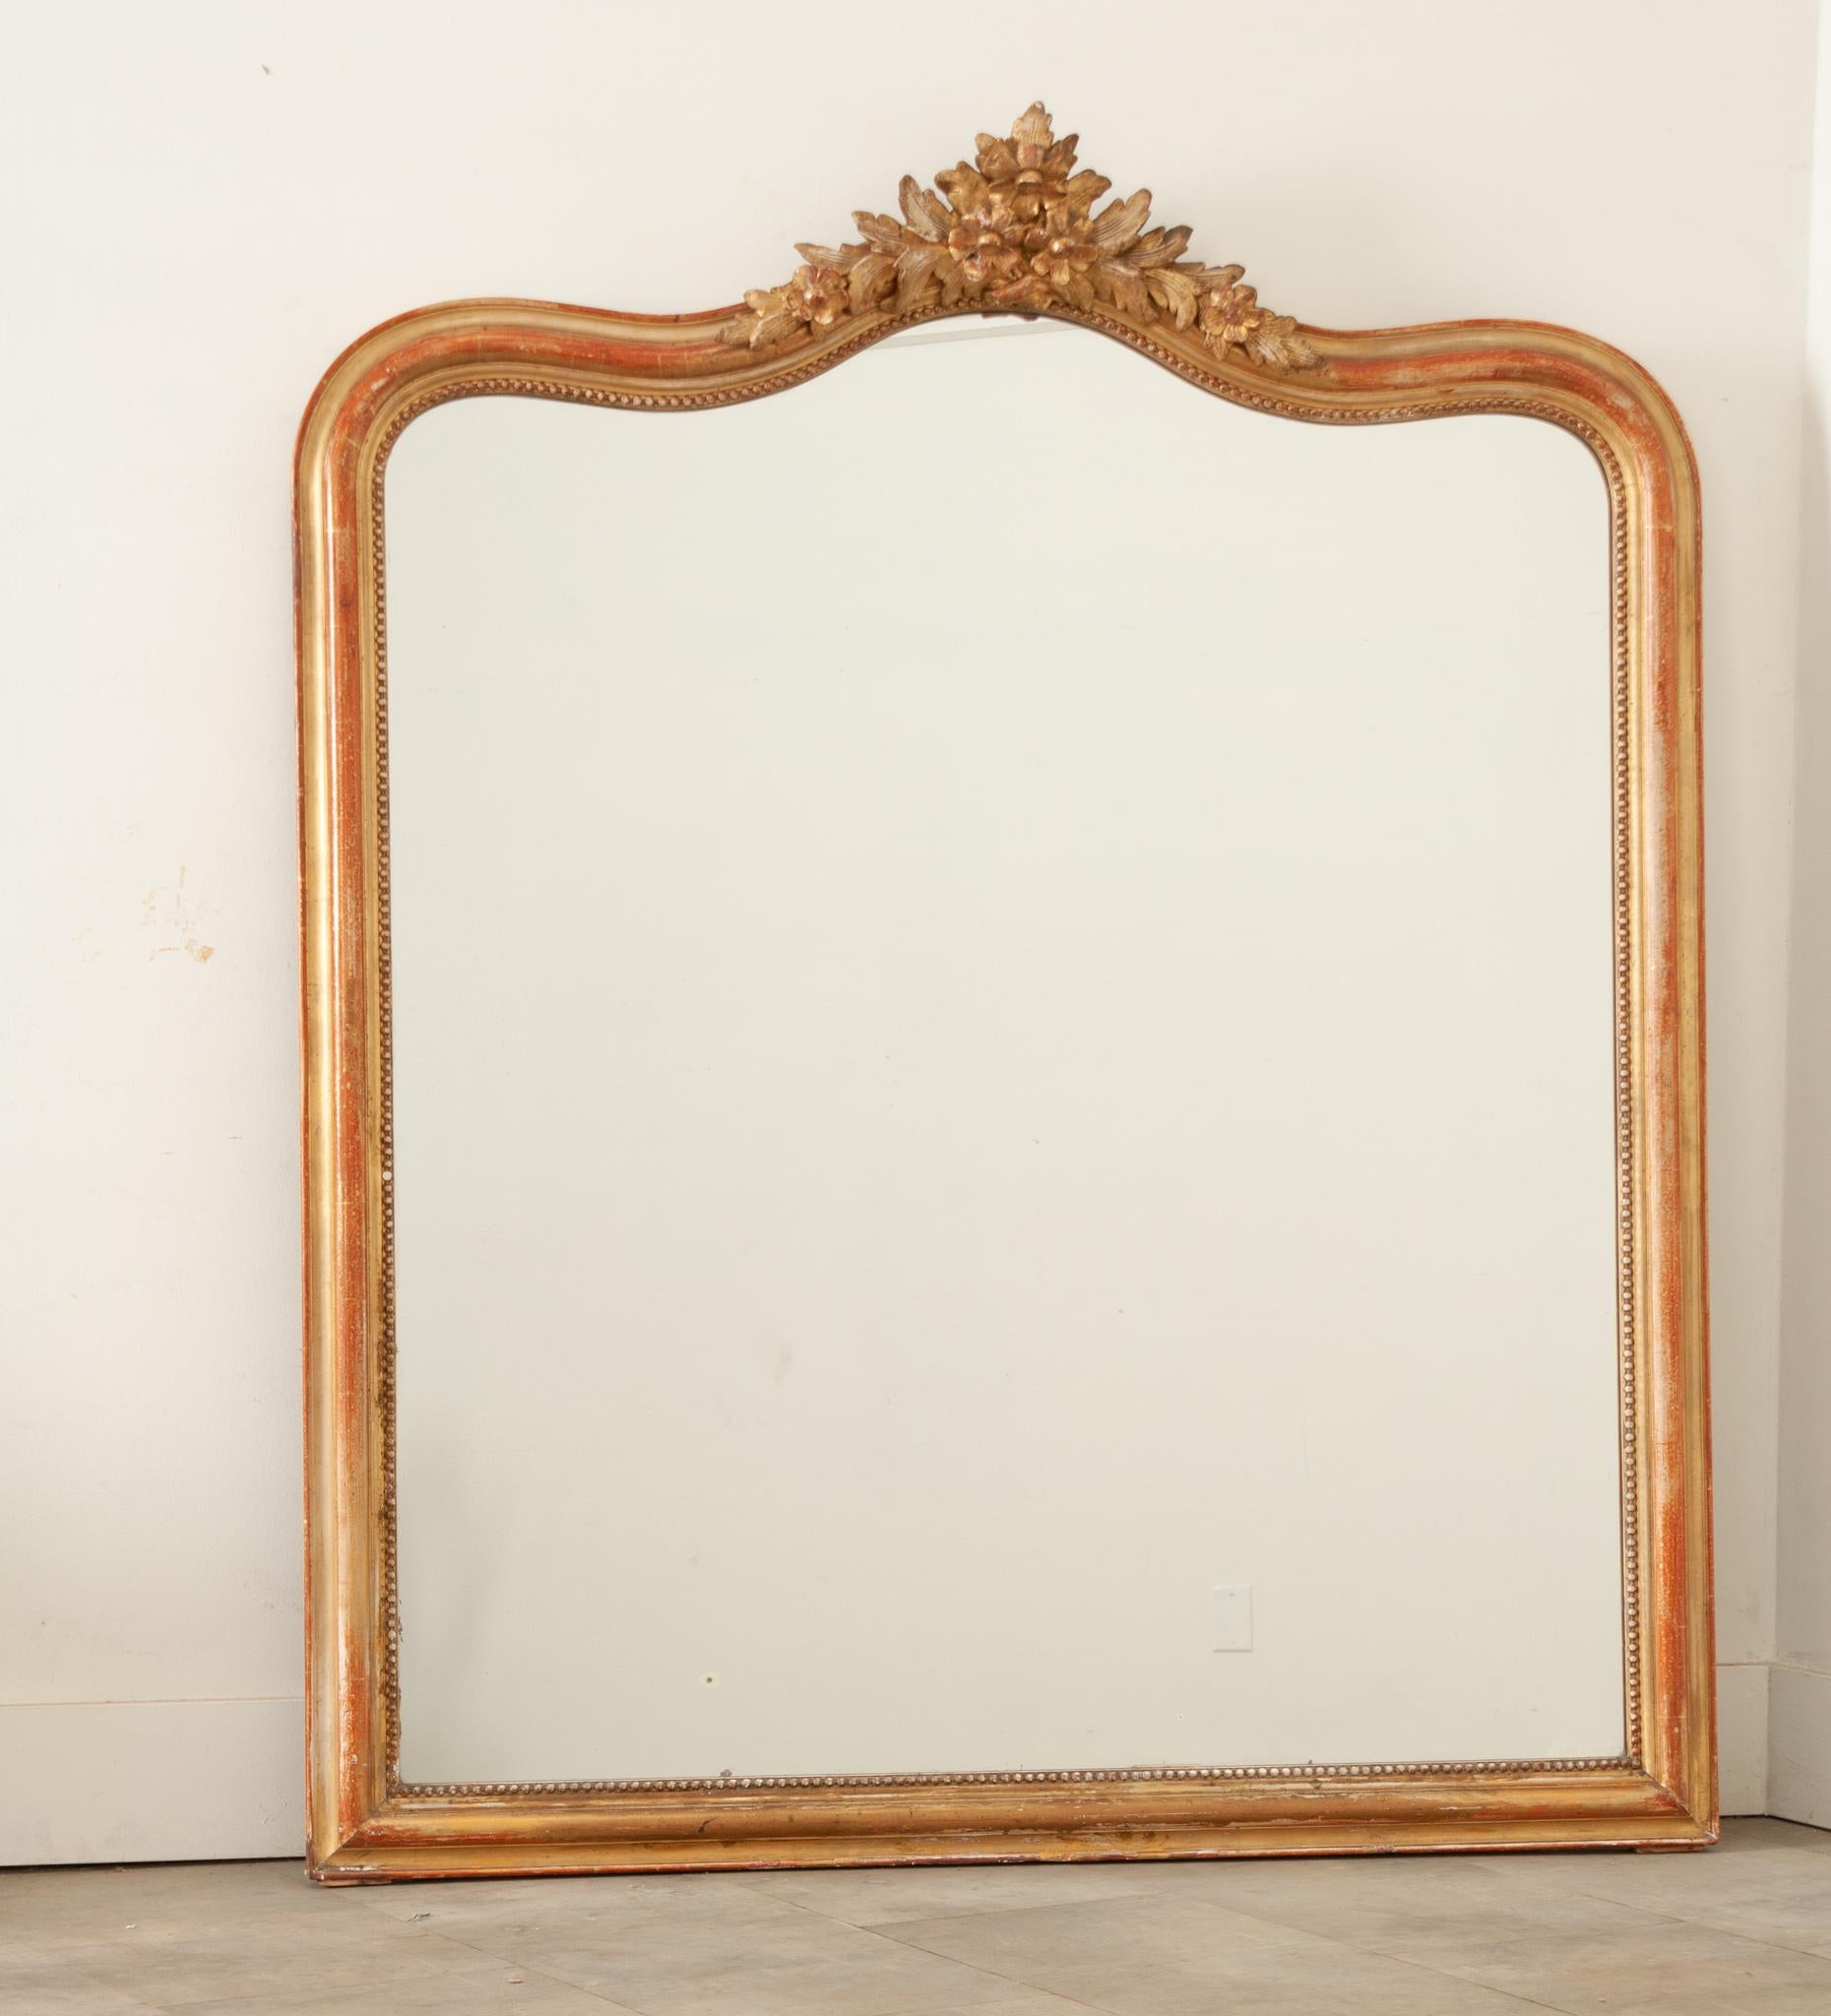 A gorgeous large scale gilt carved wood wall or mantel mirror crafted in 19th century France. The original mercury mirror is in great condition and its shaped frame is surrounded by a handsome carved bead border. This mirror has a lovely centered